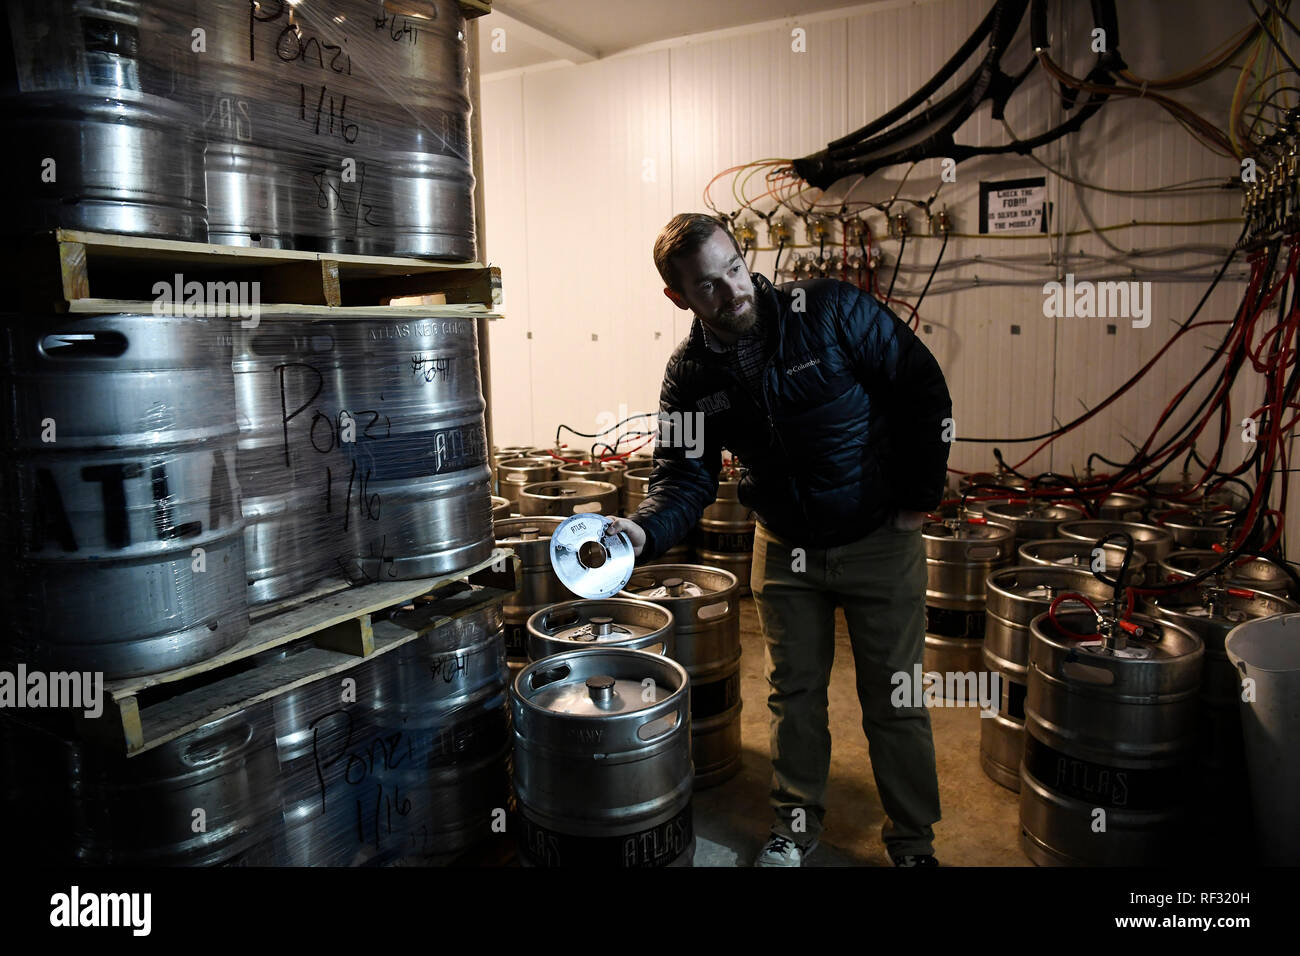 (190123) -- WASHINGTON, Jan. 23, 2019 (Xinhua) -- Justin Cox, owner of a craft brewing business, shows a keg label approved by the Treasury Department's Alcohol and Tobacco Tax and Trade Bureau (TTB) before government shutdown in Ivy City in northeastern Washington, DC, the United States, Jan. 17, 2019. Located in the community of Ivy City in northeastern Washington, DC, Justin Cox's 12-feet-tall (around 3.66 meters tall) brewery has 14 production tanks, with a strong hop aroma filling the air. His craft brewing business has been running smoothly for over five years until just recently. With Stock Photo